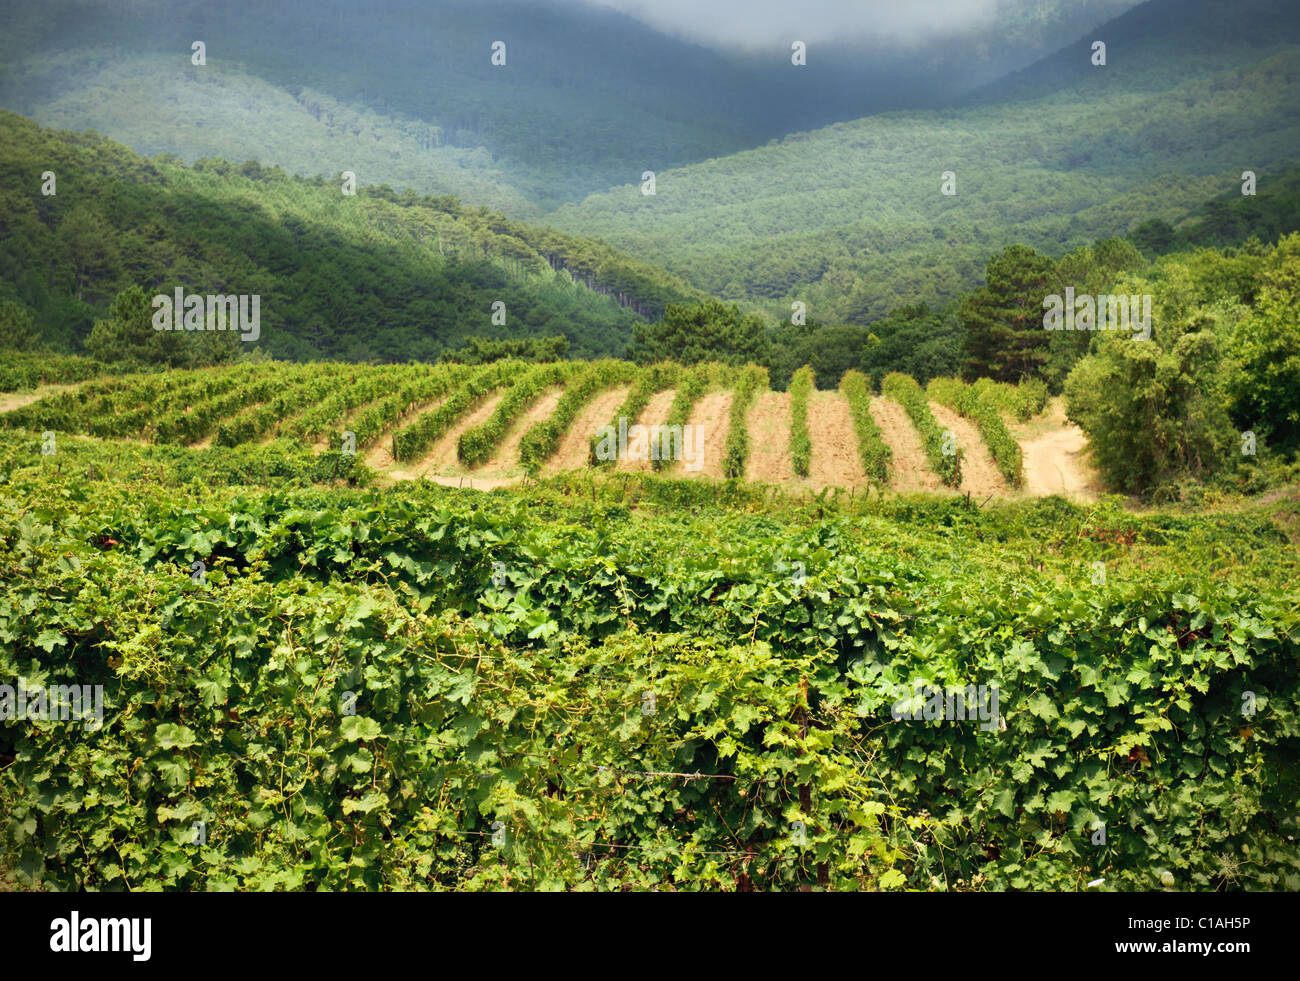 Grape culture in mountains. Vineyard Stock Photo